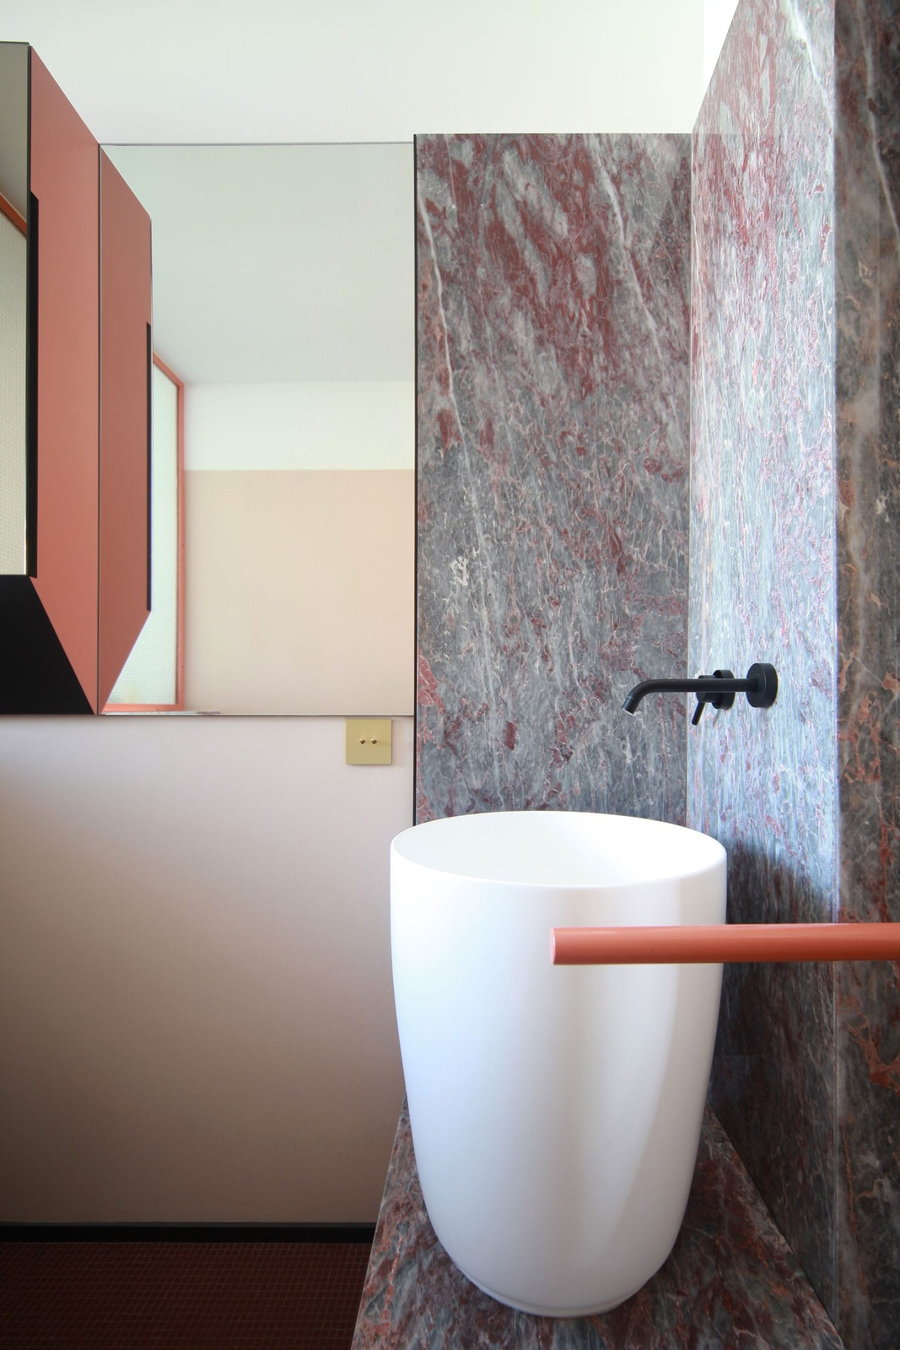 Soft pink marble adorns the bathroom inside the renovated Teorema Milanese